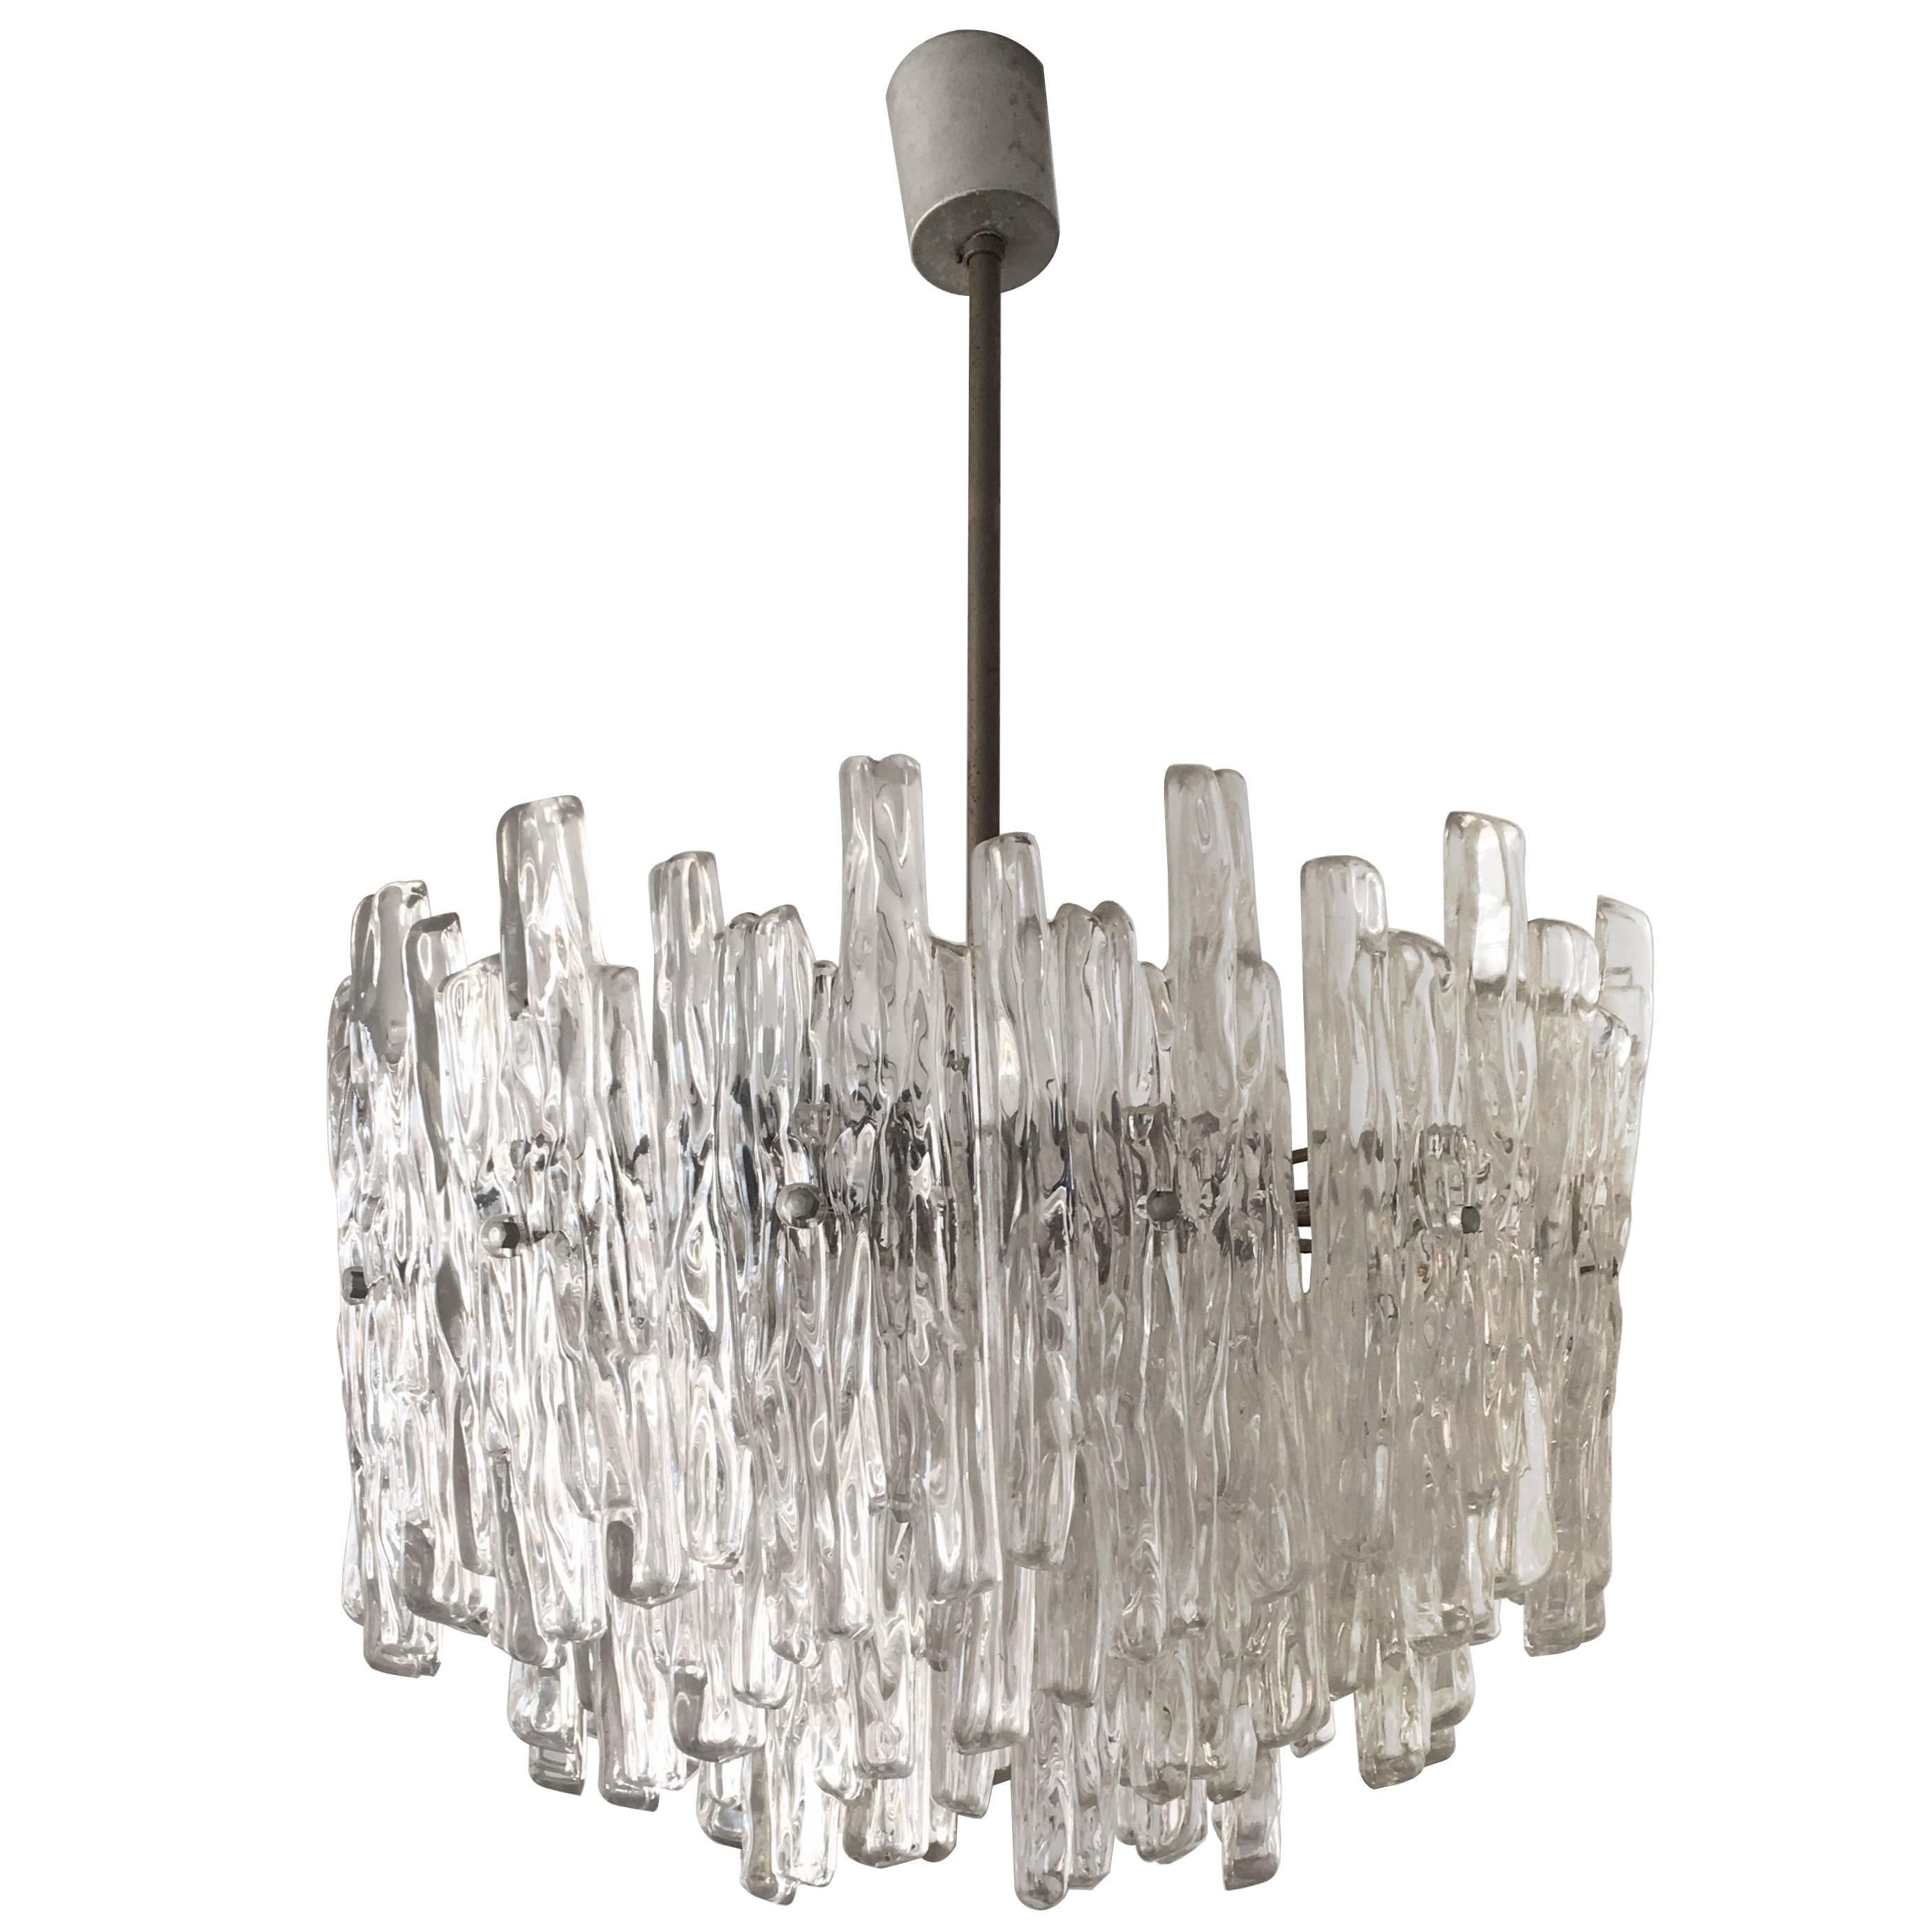 Exceptional Three-Tiered Dramatic Lucite Chandelier in Style of Kalmar, 1960s